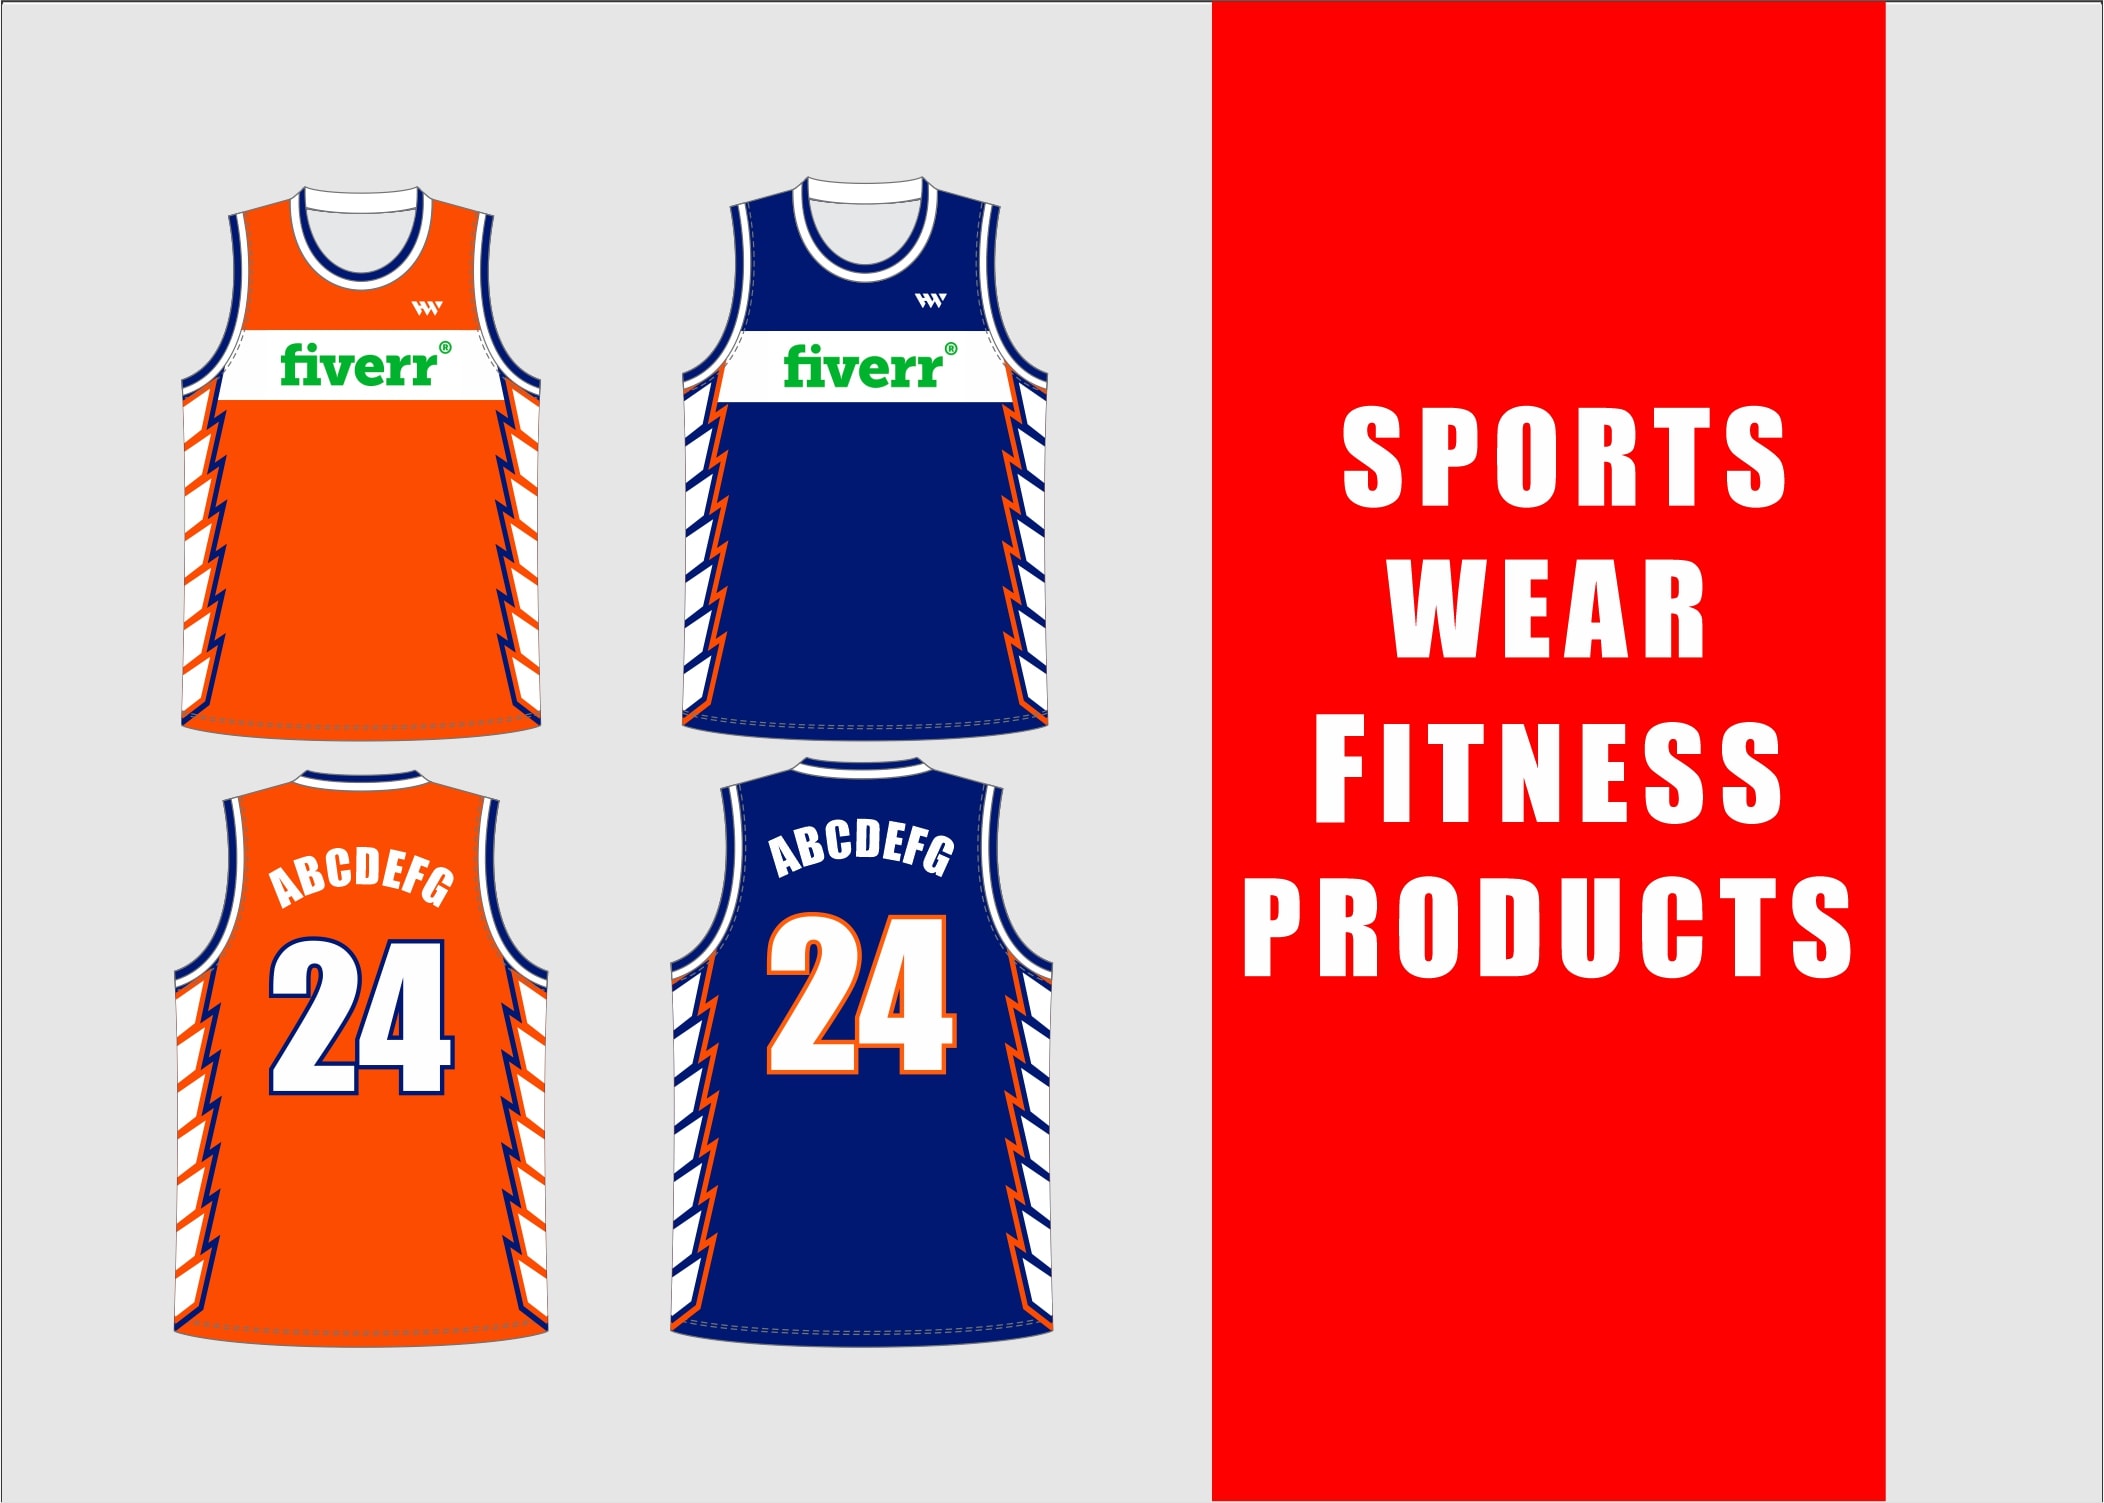 Design sublimation sportswear, fitness wear products by Maryamyounas11